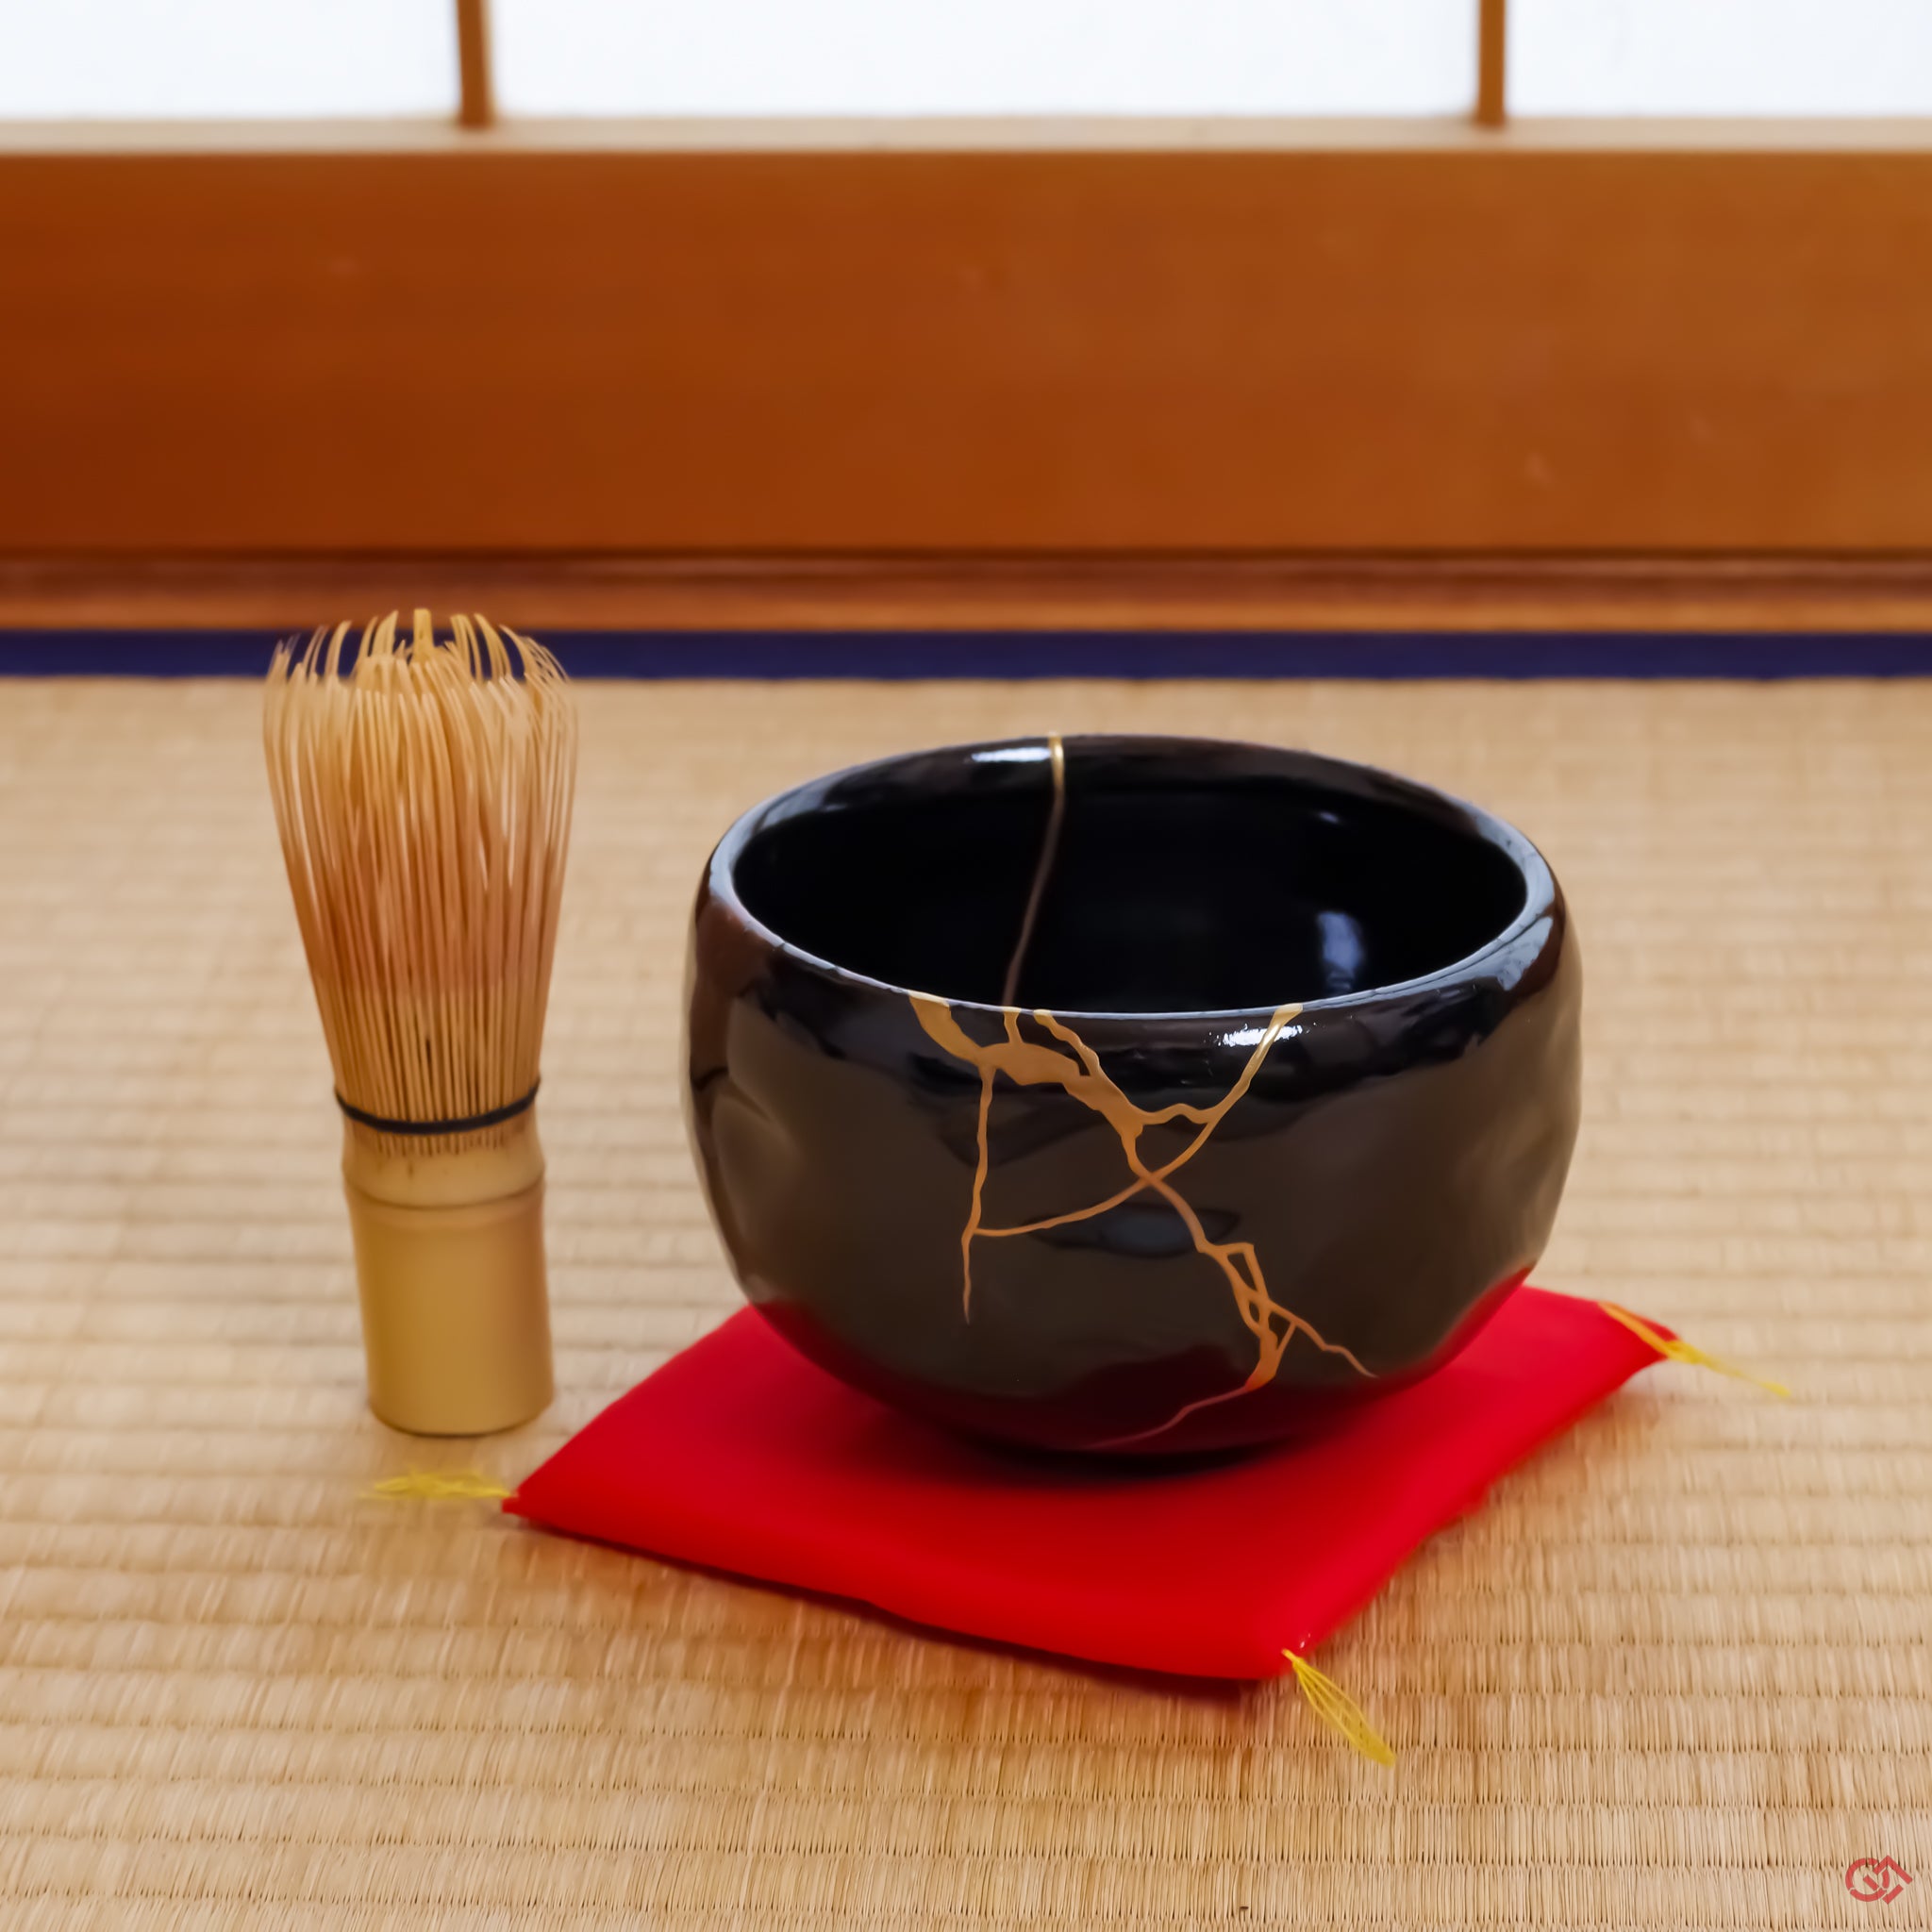 Photo of an authentic Kintsugi pottery piece being used in a real-world setting